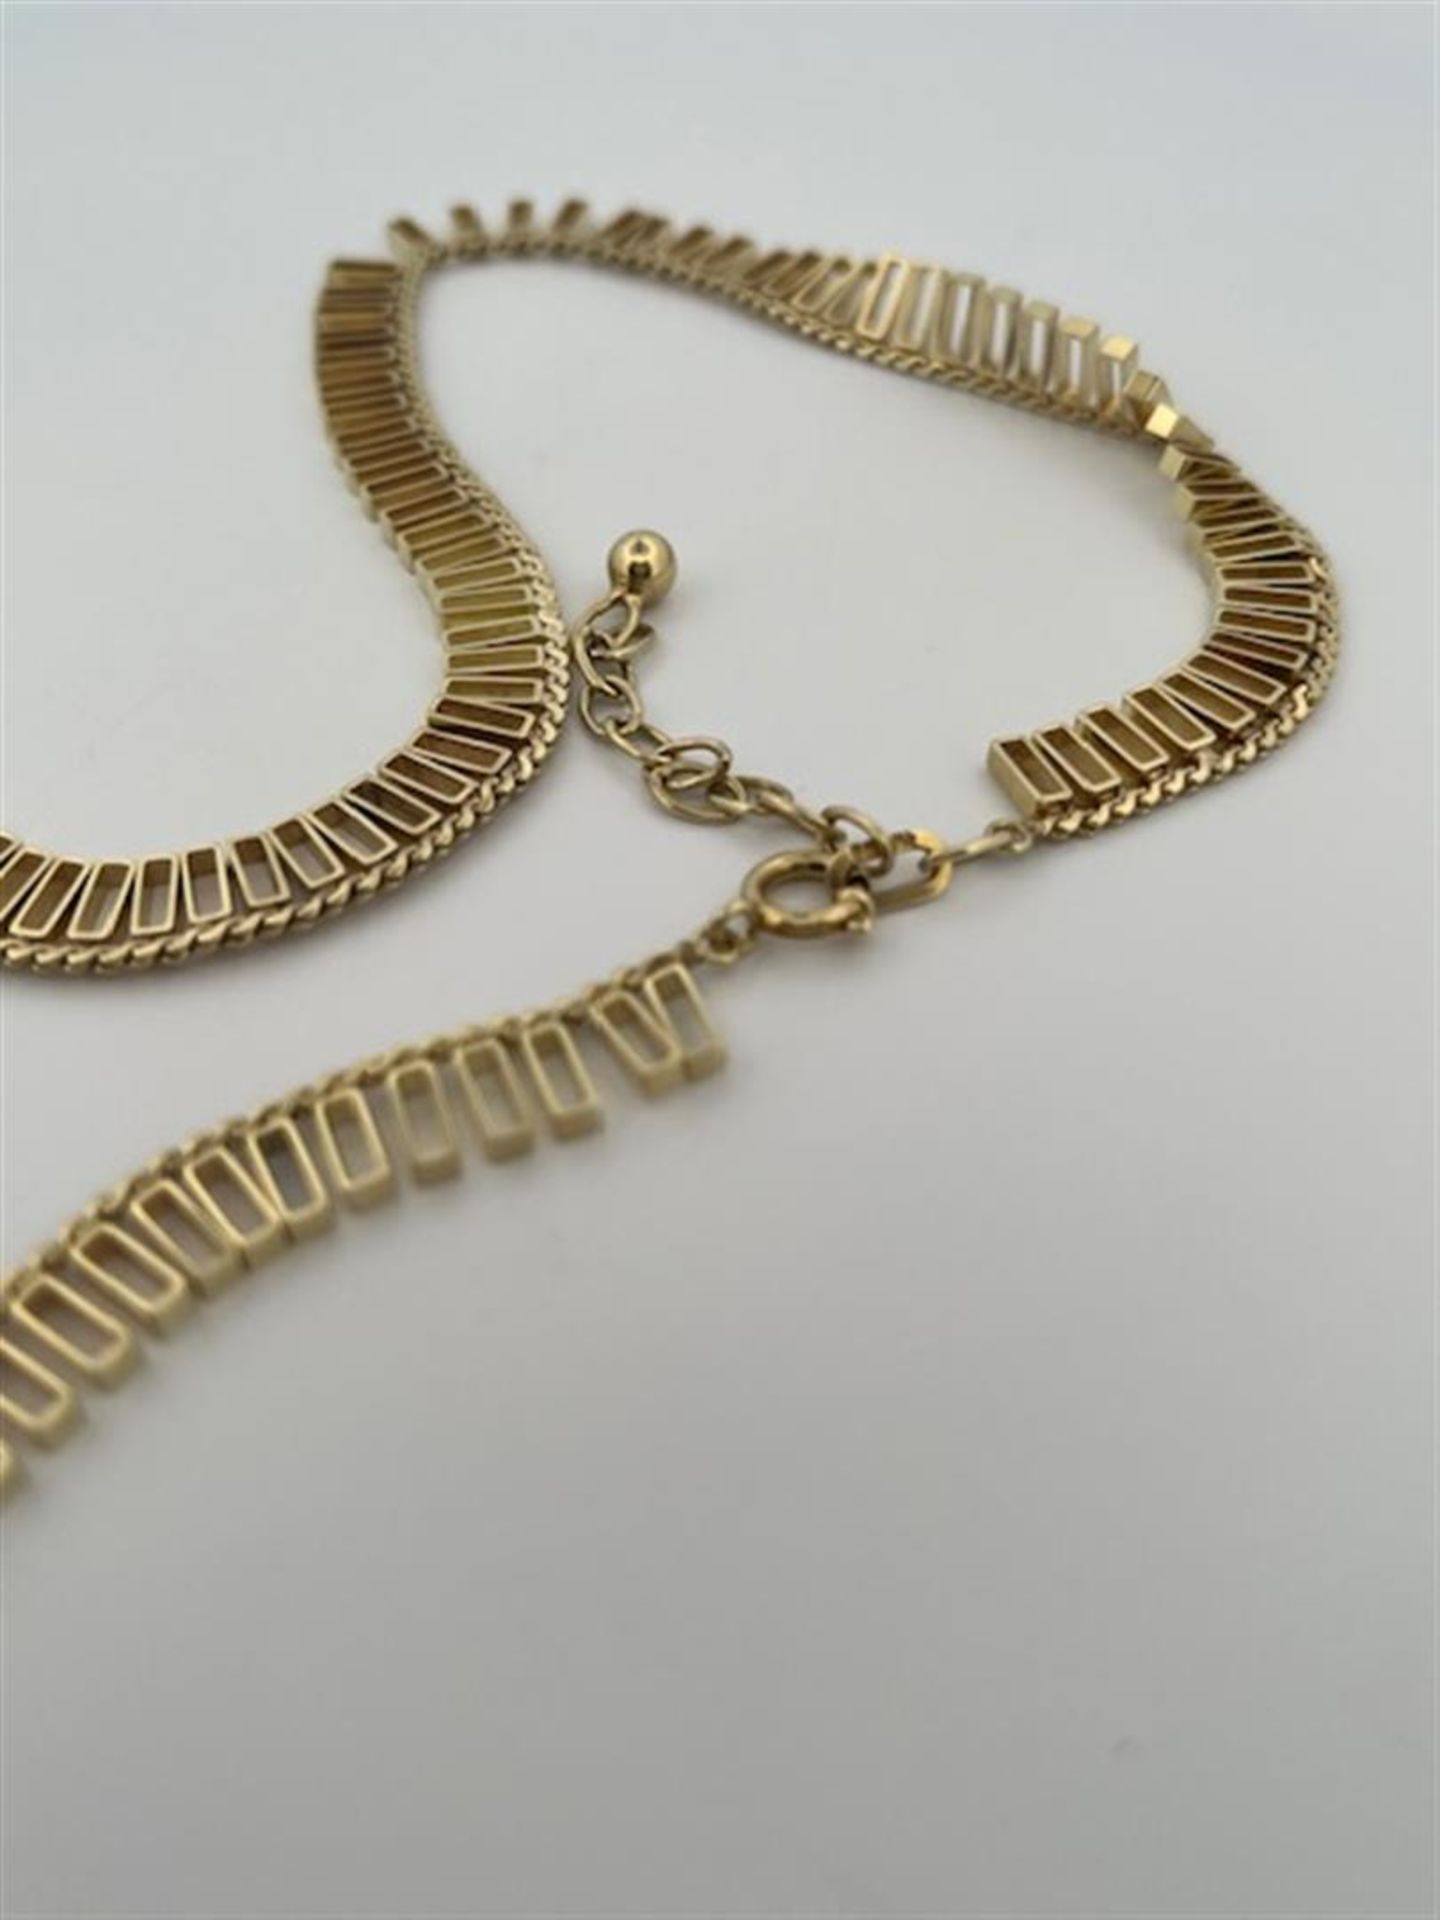 14kt S-shape link necklace with rectangular bars.
The necklace has a beautiful and elegant link with - Bild 3 aus 4